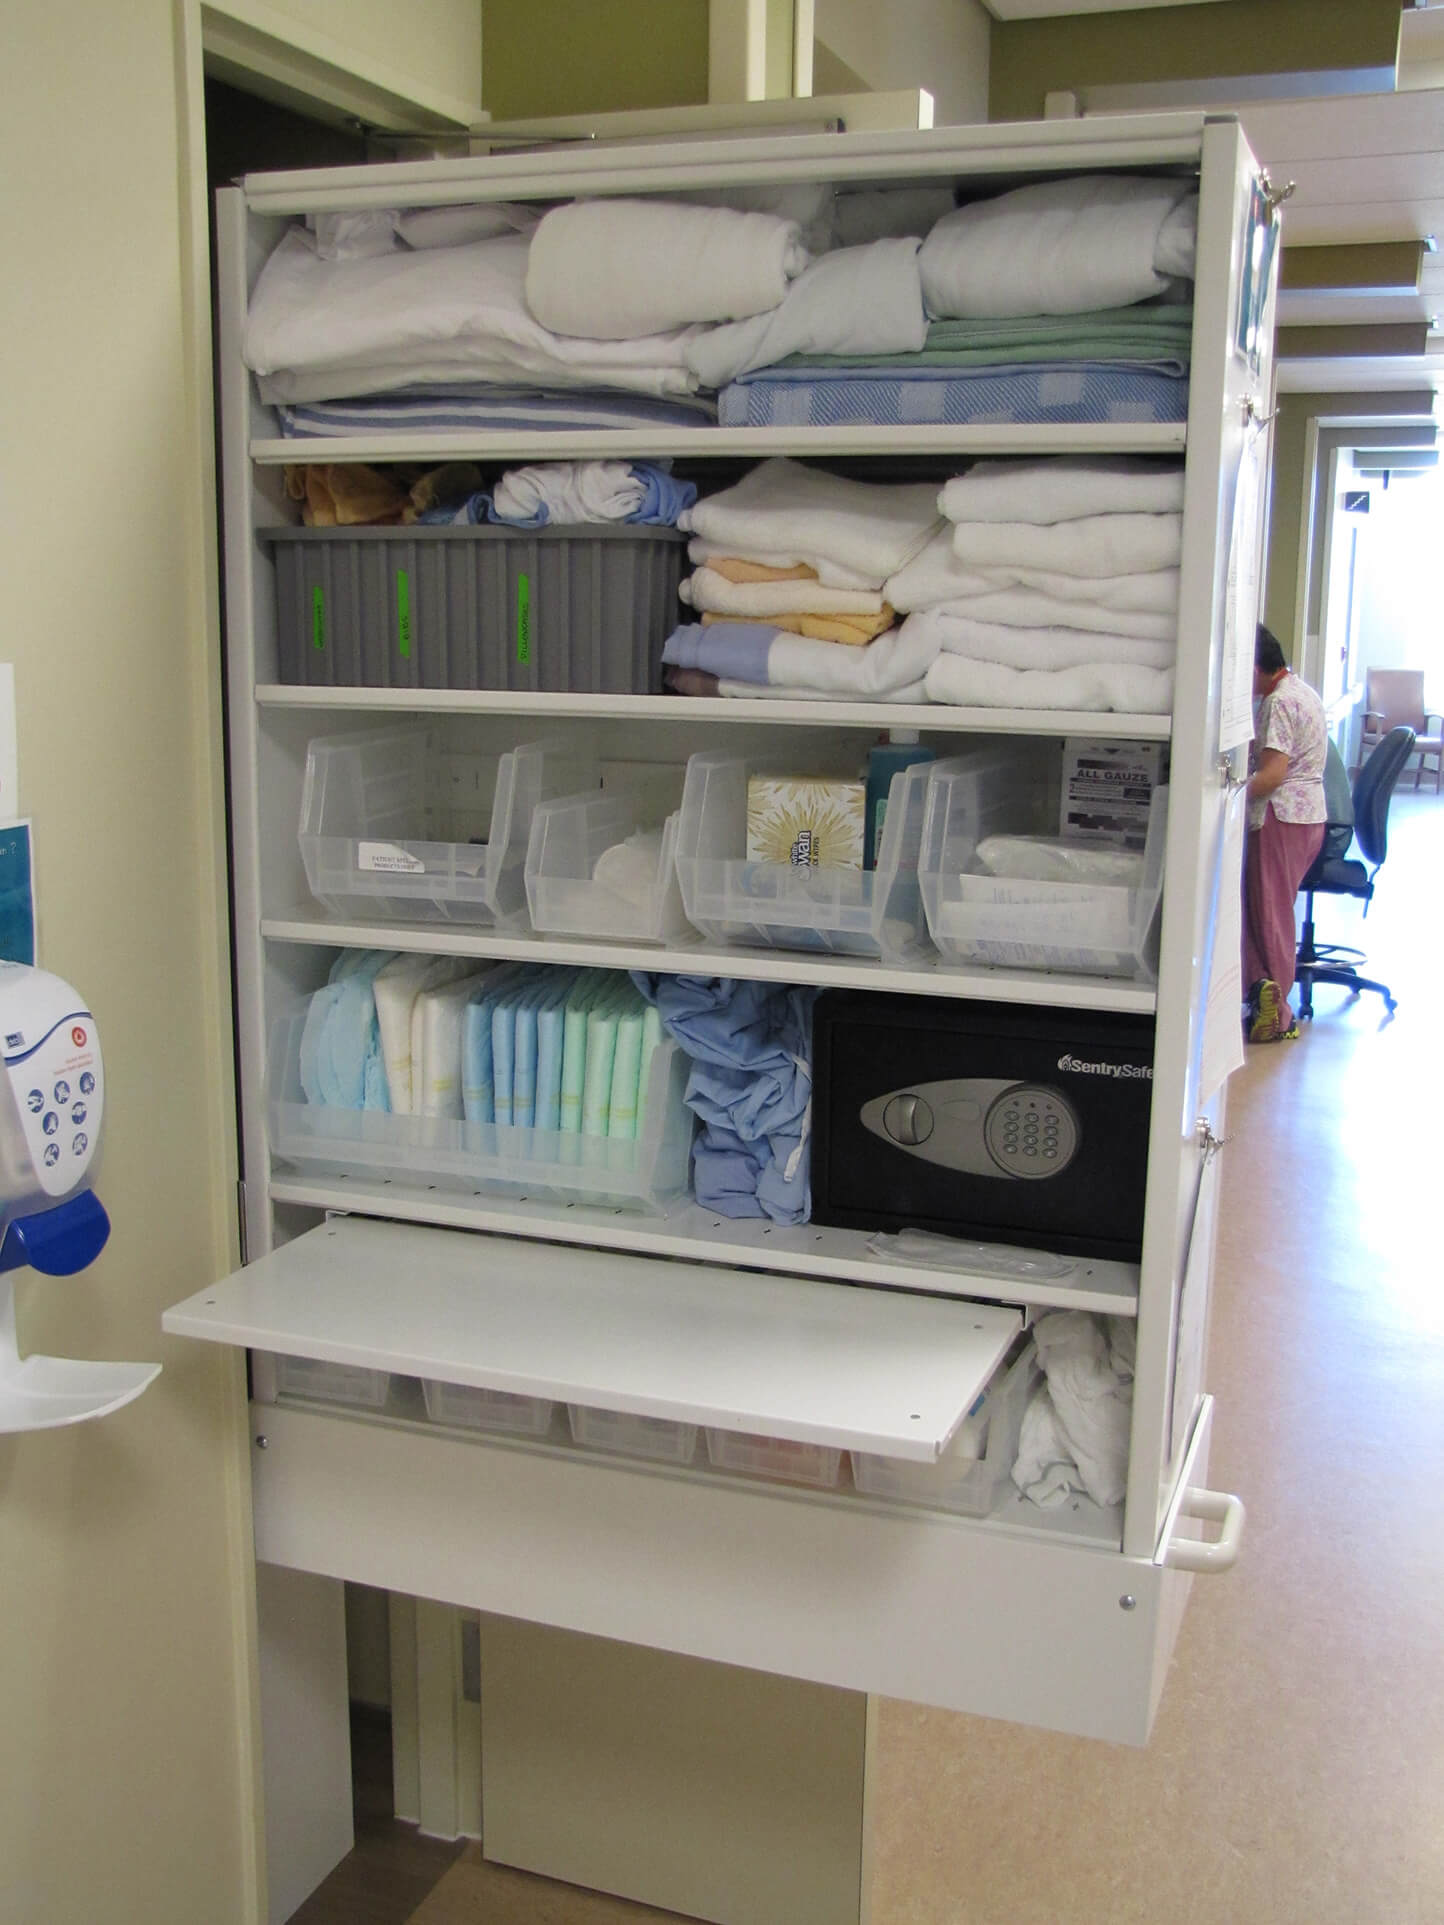 Room supplies stored on retractable shelving to replenish outside the room, yet easy access inside the room when the patient needs those supplies